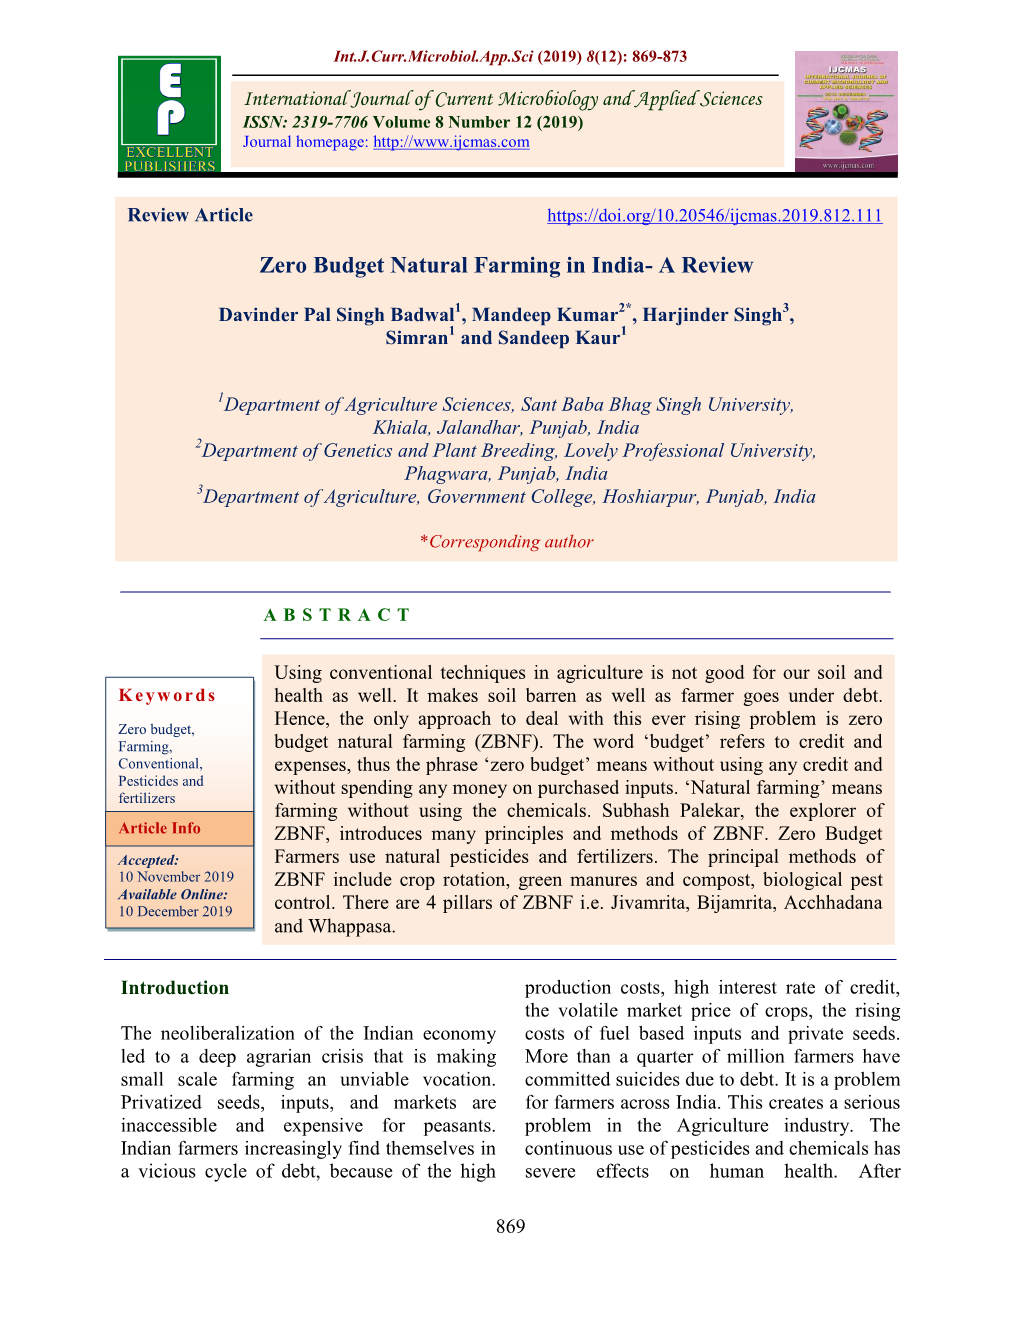 Zero Budget Natural Farming in India- a Review